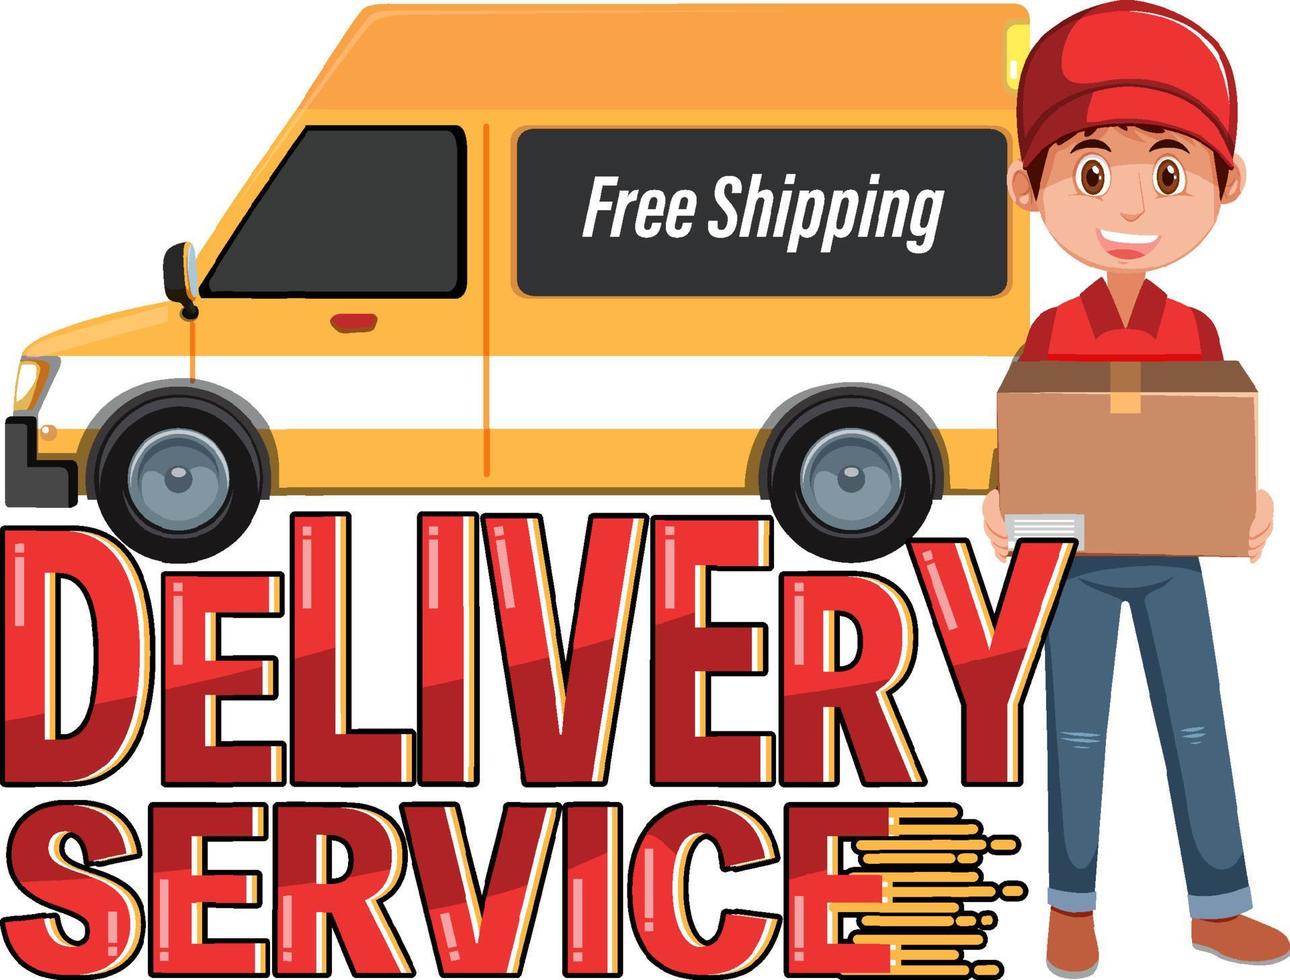 Delivery Service logo banner with courier cartoon character vector